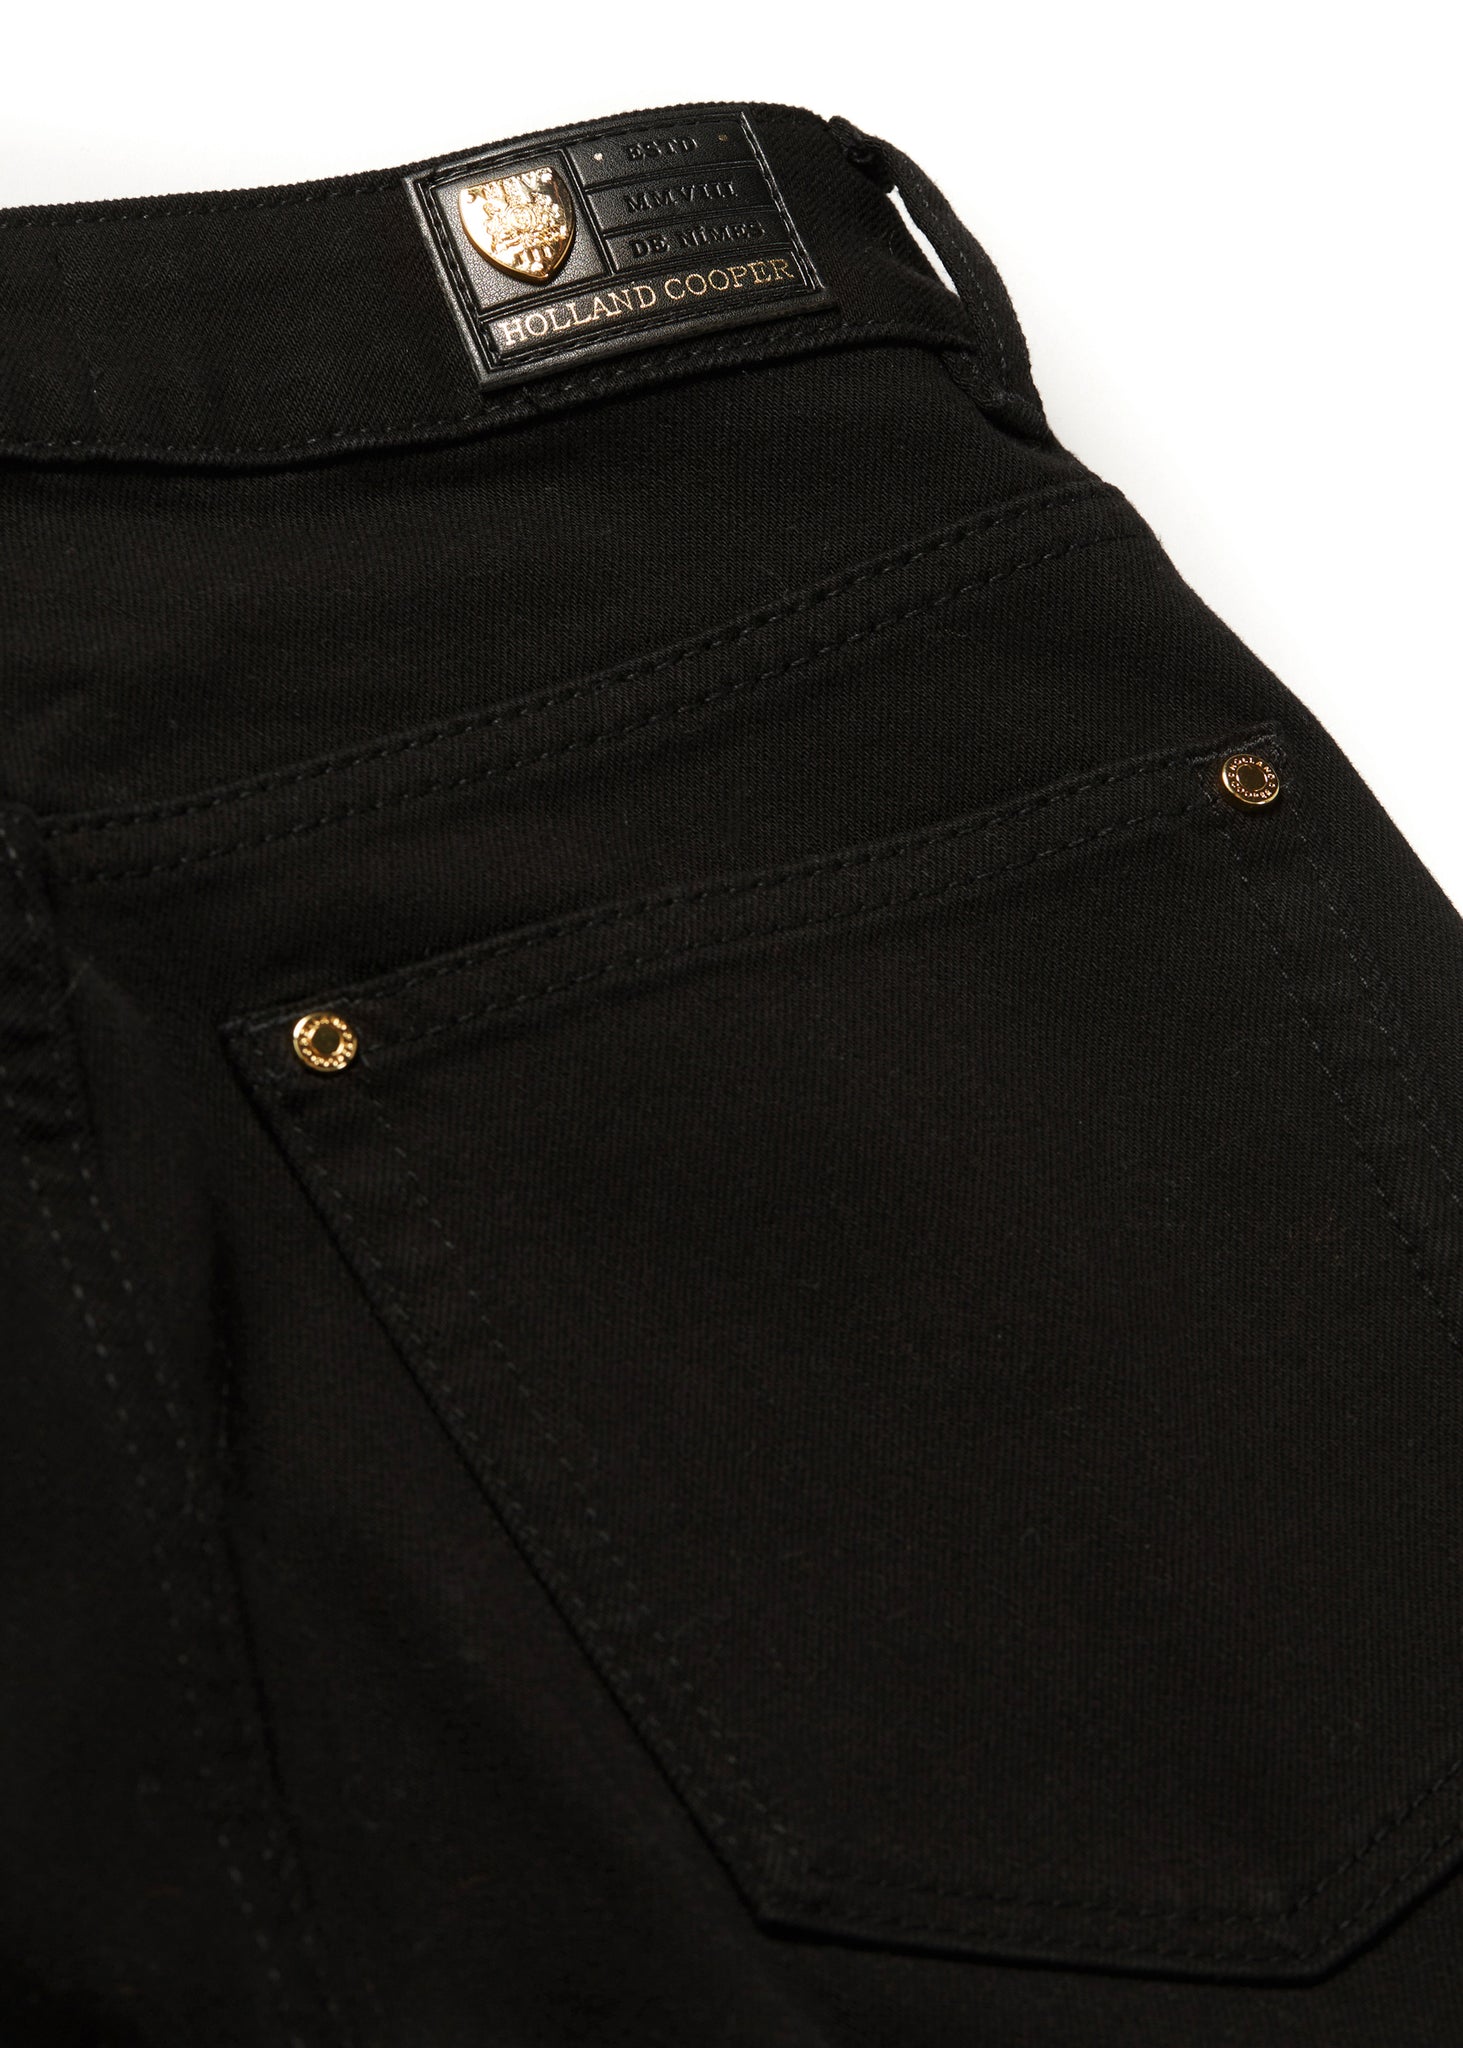 back pocket detail on womens high rise black denim slim fit jean with raw hem and two open pockets on the front and back with gold stirrup charm to the belt loop